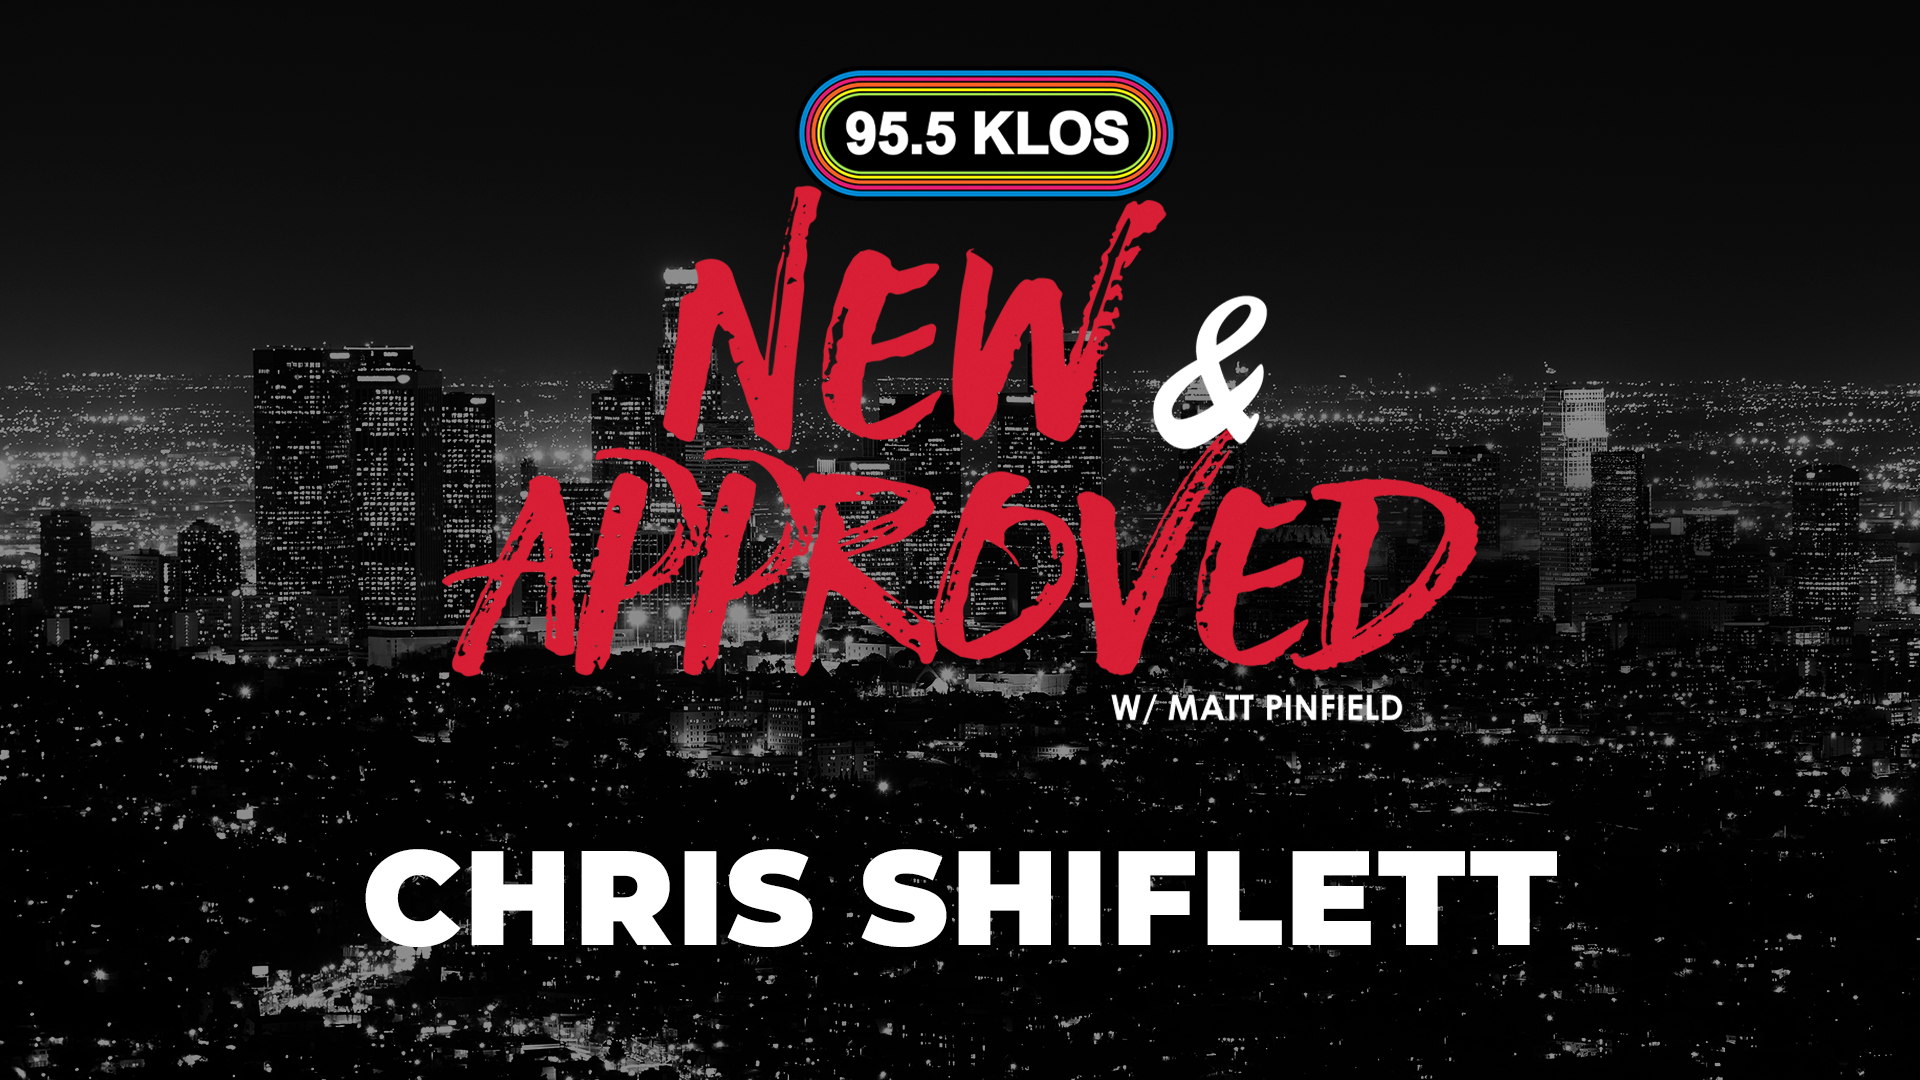 Chris Shiflett of the Foo Fighters Joins Matt Pinfield for New & Approved